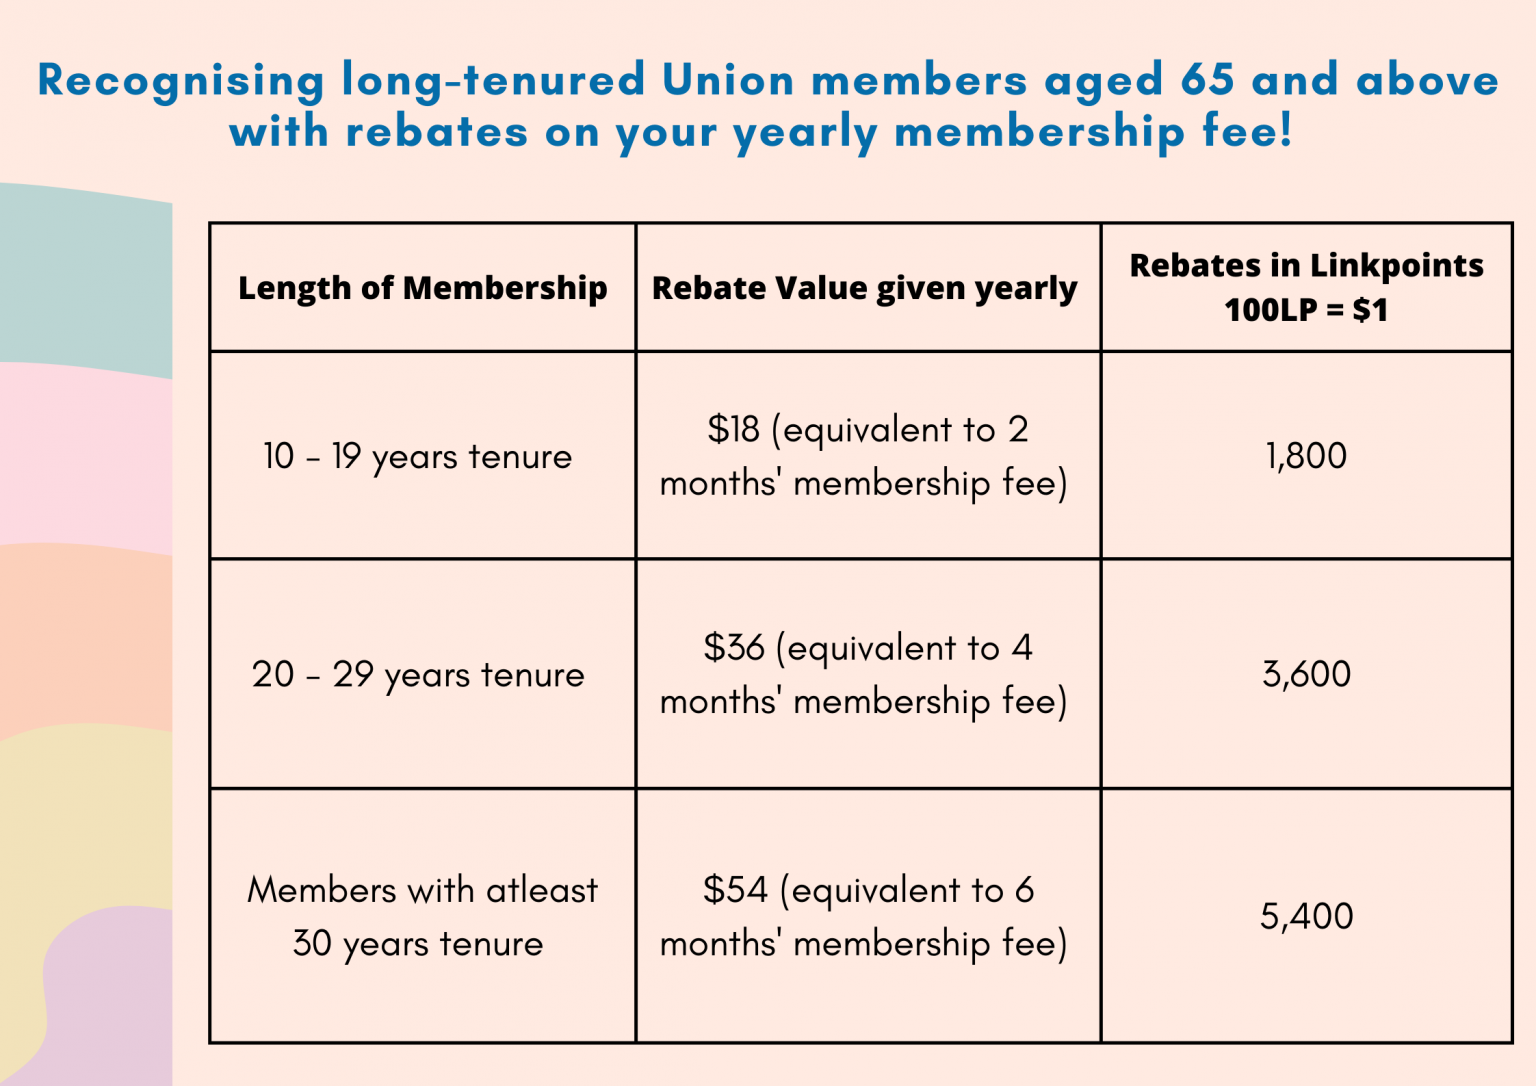 find-out-more-about-ntuc-u65-loyalty-rebates-scheme-amalgamated